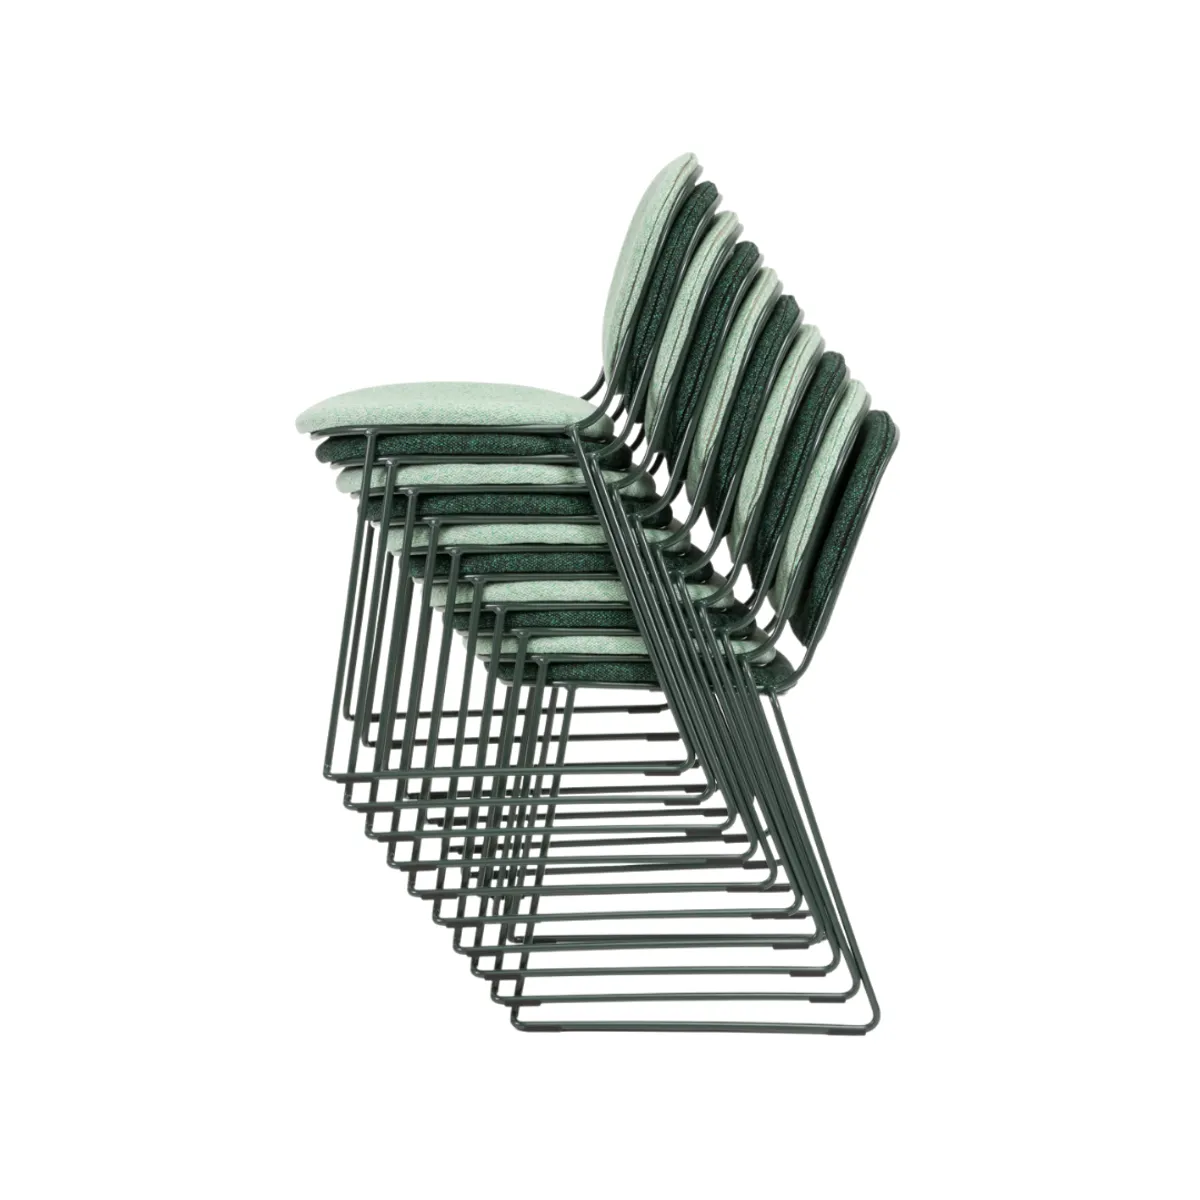 Timo stacking chair 4